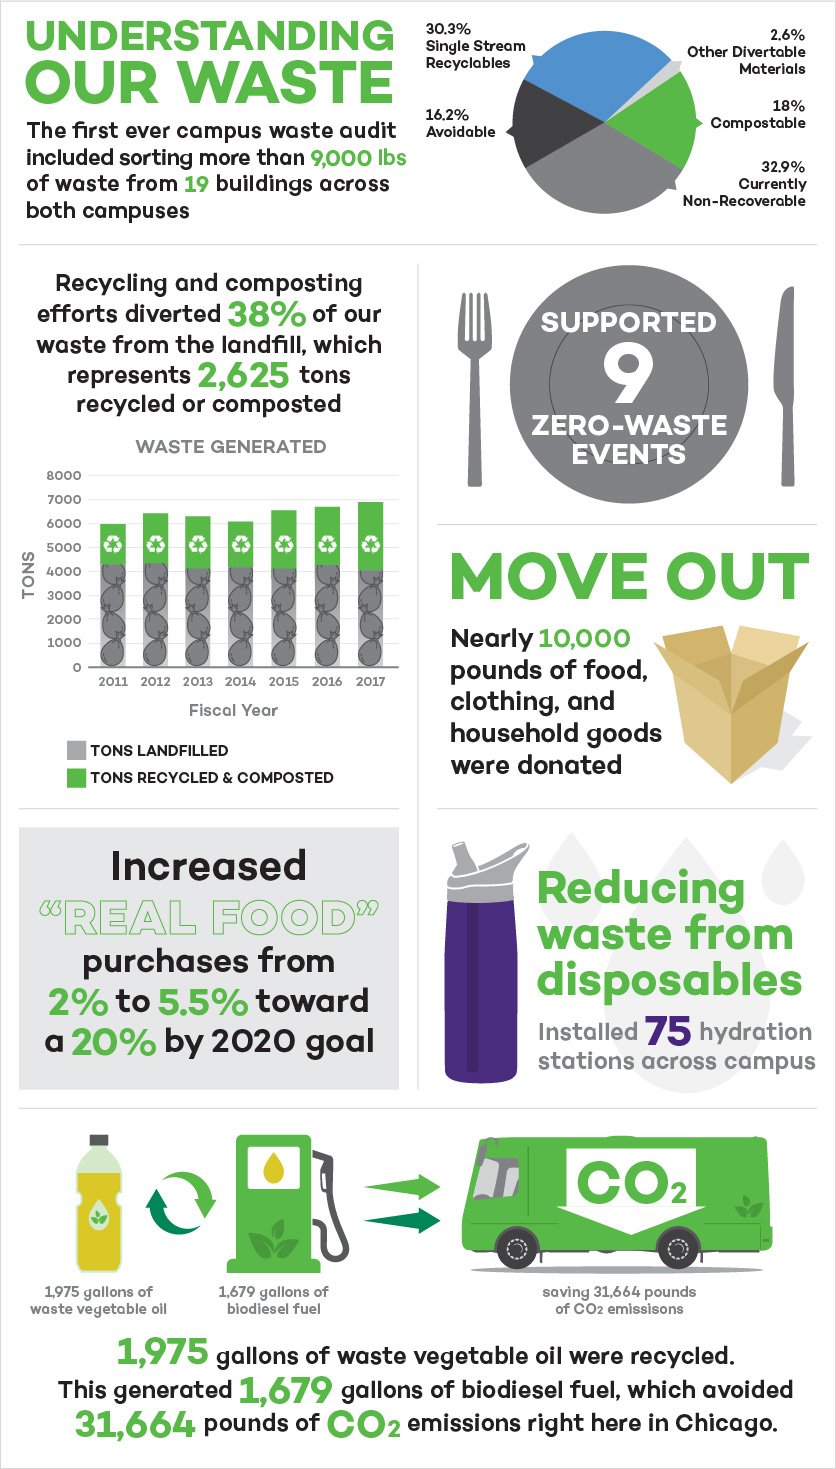 Understanding our waste: The first ever campus waste audit included sorting more than 9,000 lbs of waste from 19 buildings across both campuses.  • 30.3% single stream recyclables  • 32.9% currently non-recoverable • 18% compostable • 16.2% avoidable  • 2.6% other divertable materials  Recycling and composting efforts diverted 38% of our waste from landfills, which represents 2,625 tons recycled or composted.  Supported 9 zero-waste events  Nearly 10,000 pounds of food, clothing, and household goods were donated during move out. Increased “real food” purchase from 2% to 5.5% toward a goal of 20% by 2020.  Reducing waste from disposable: Installed 75 hydration stations across campus.  1,975 gallons of waste vegetable oil were recycled. This generated 1,679 gallons of biodiesel fuel, which avoided 31,664 pounds of CO2 emissions right here in Chicago. 